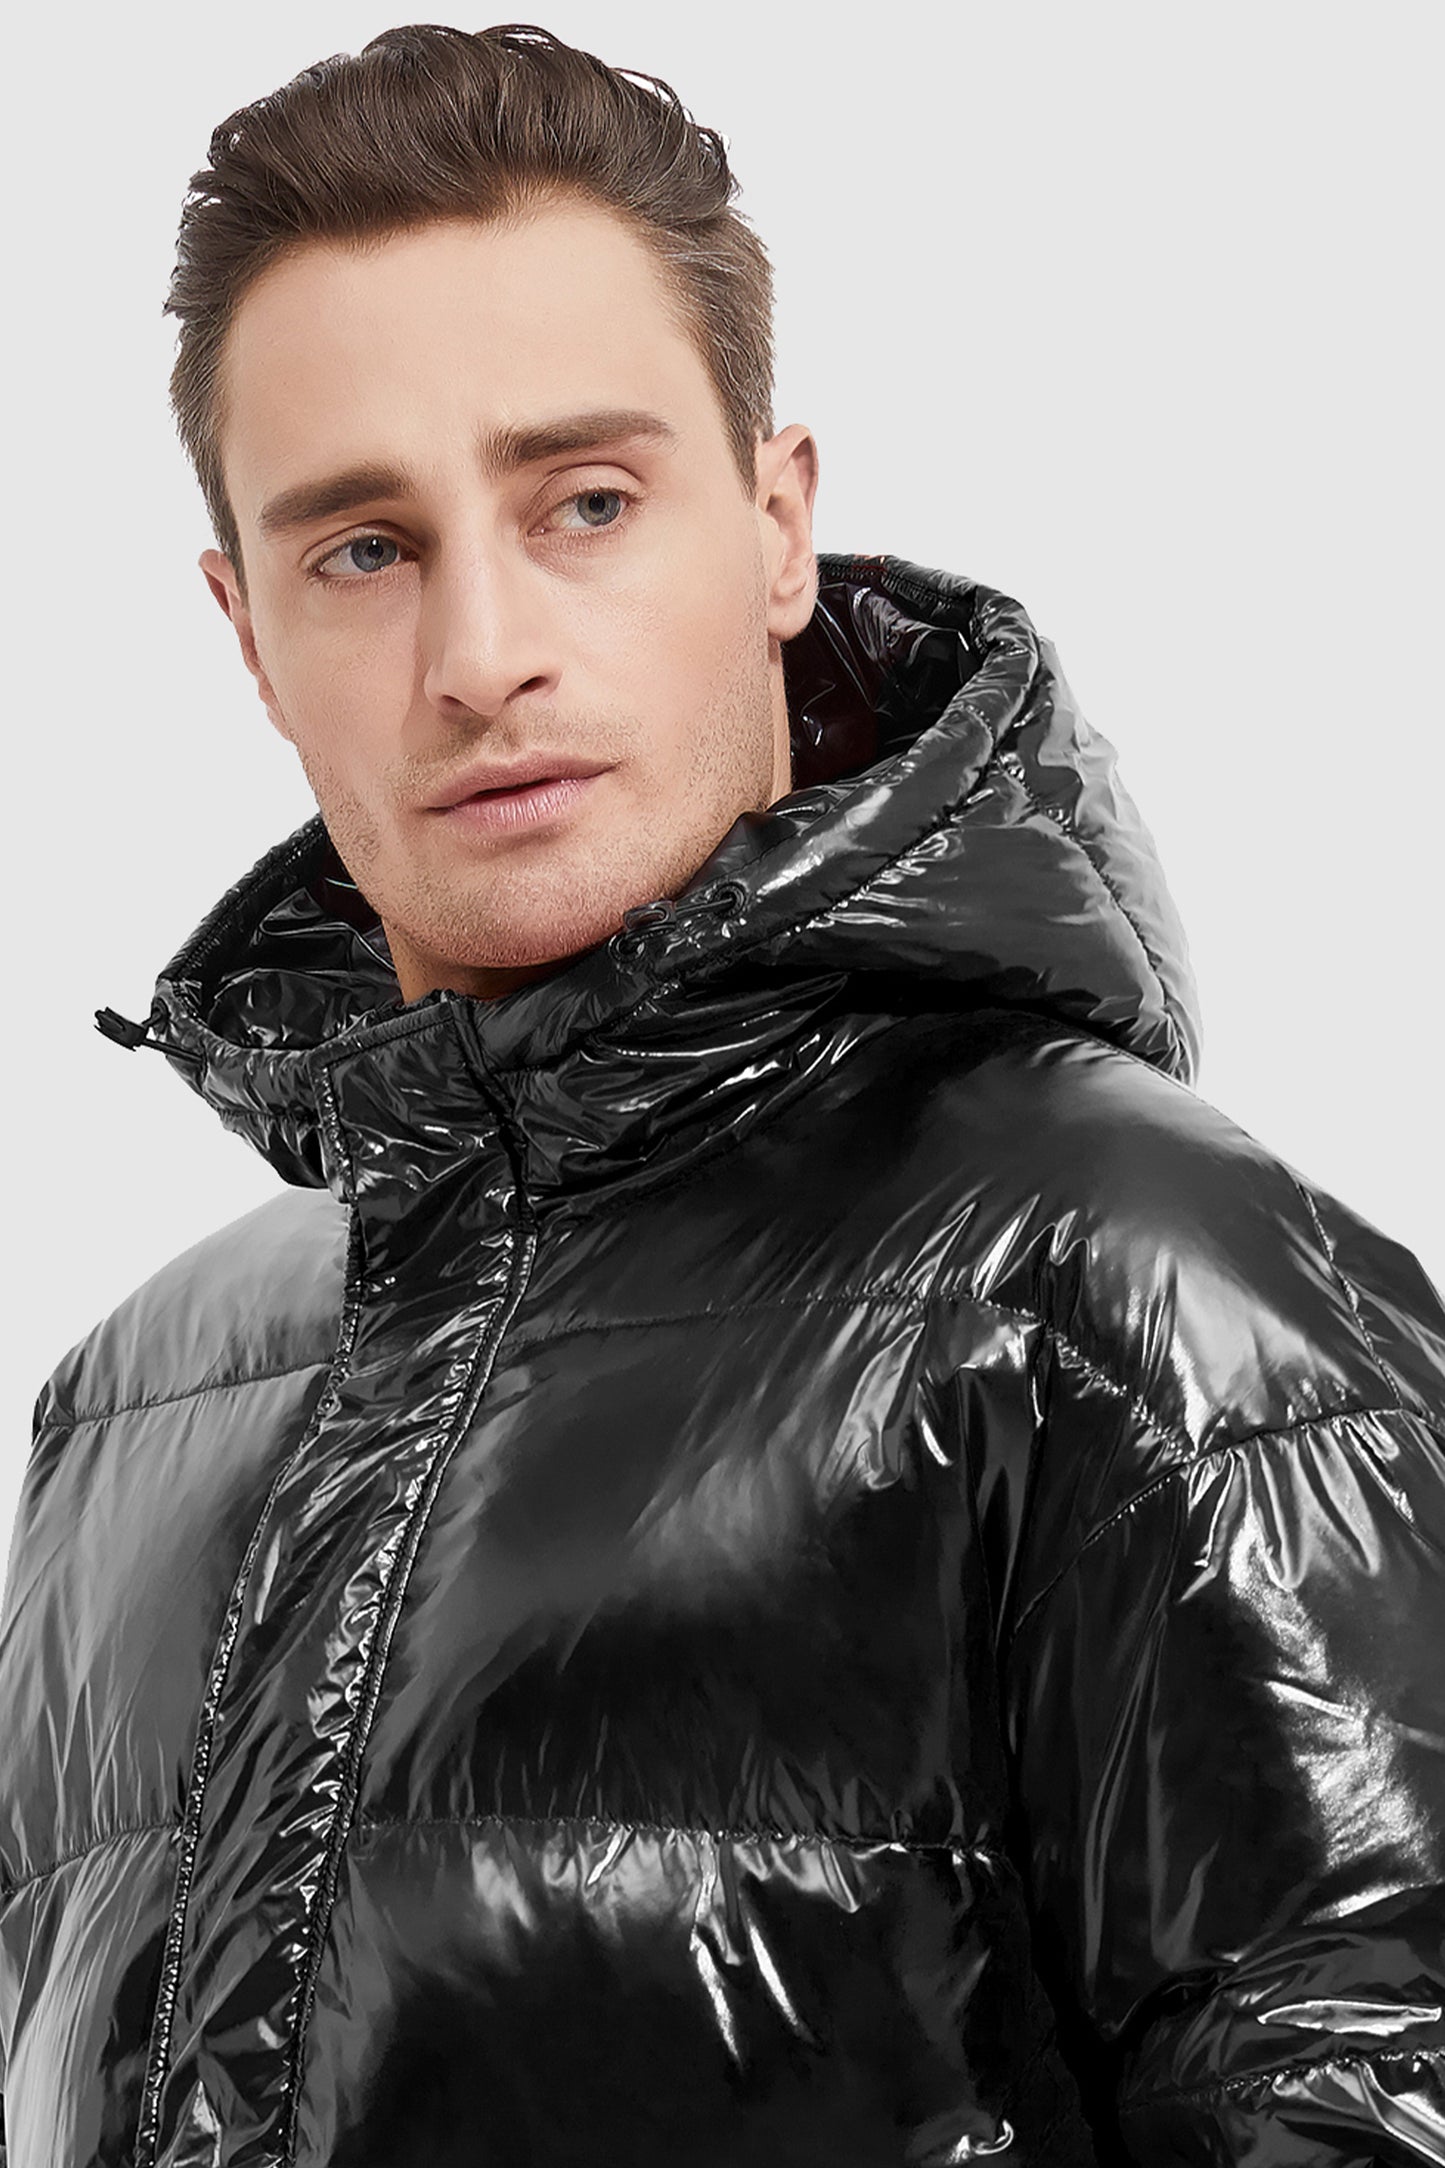 Stand Collar Shiny Down Jacket